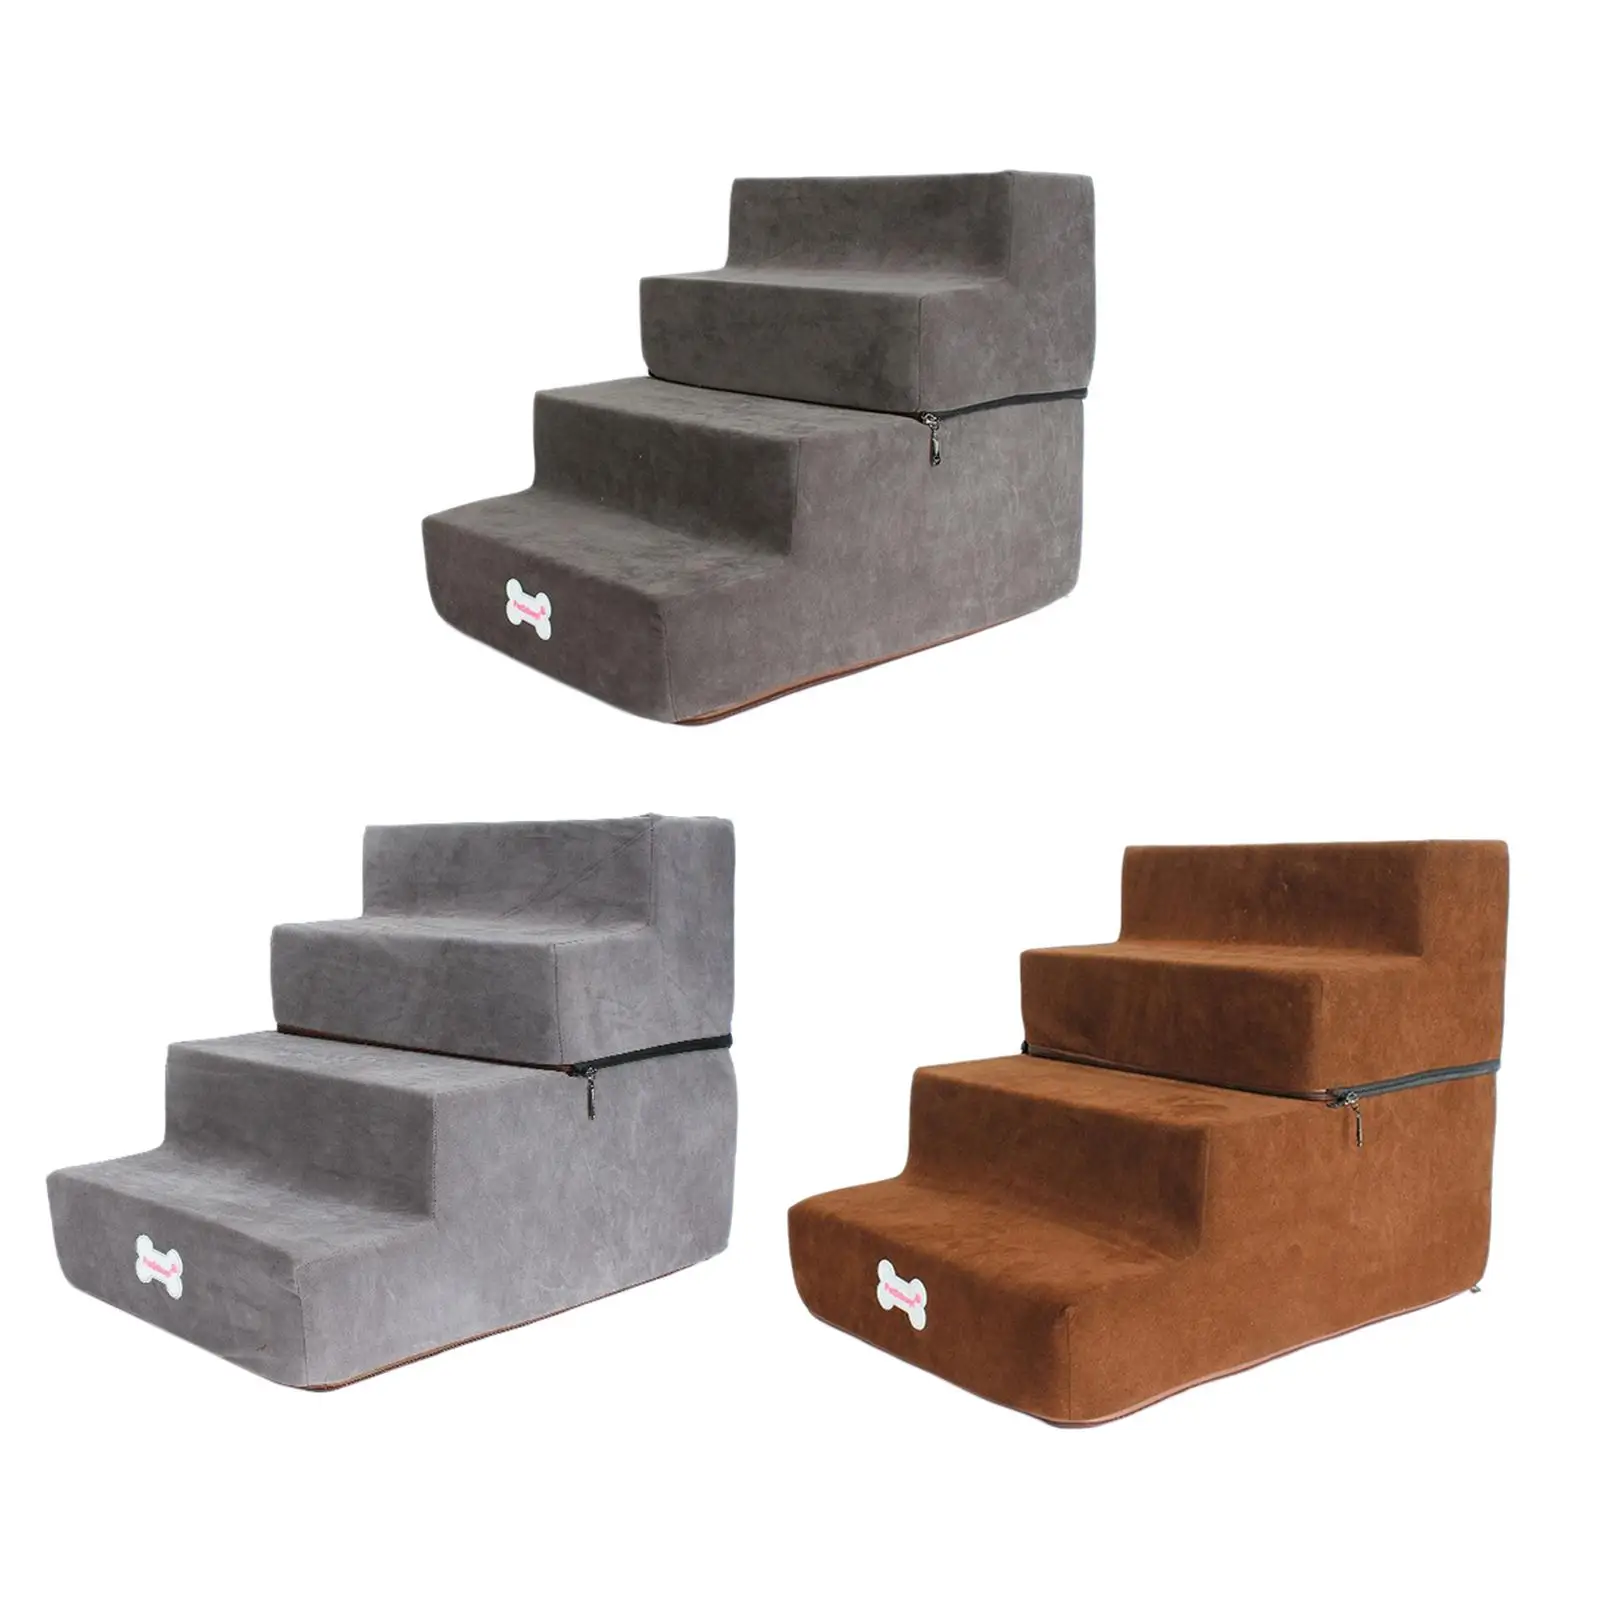 Soft Dog Steps Stairs, Pet Ramp Ladder, Detachable Cover, Non Slip Climbing Slope, Pet Dog Stairs Indoor Small Dogs